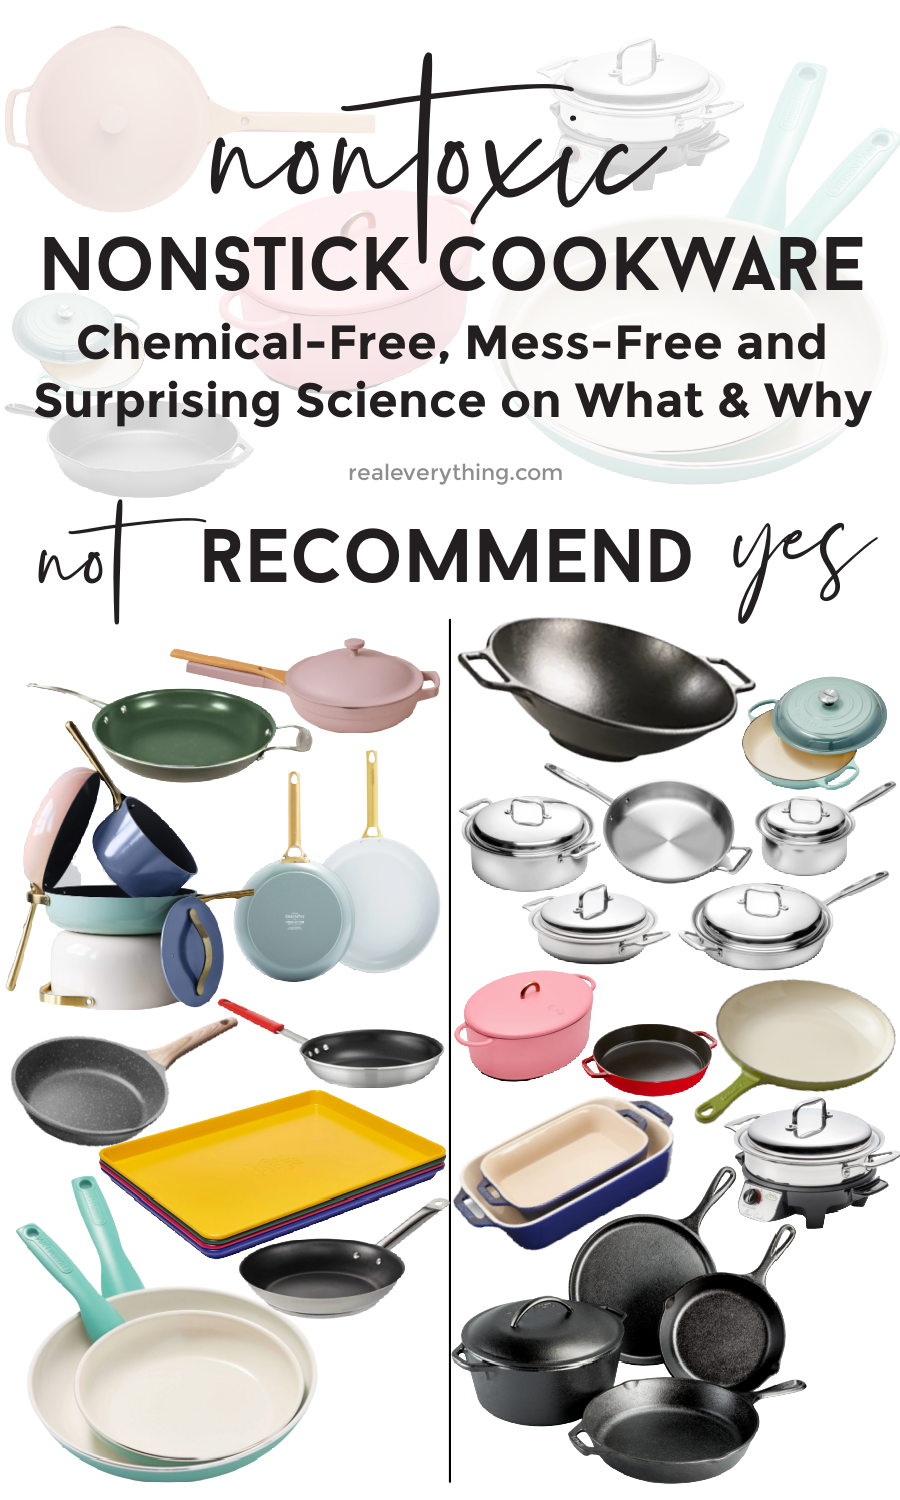 https://realeverything.com/wp-content/uploads/Nontoxic-Nonstick-Cookware-StacyToth-RealEverything-pin.png